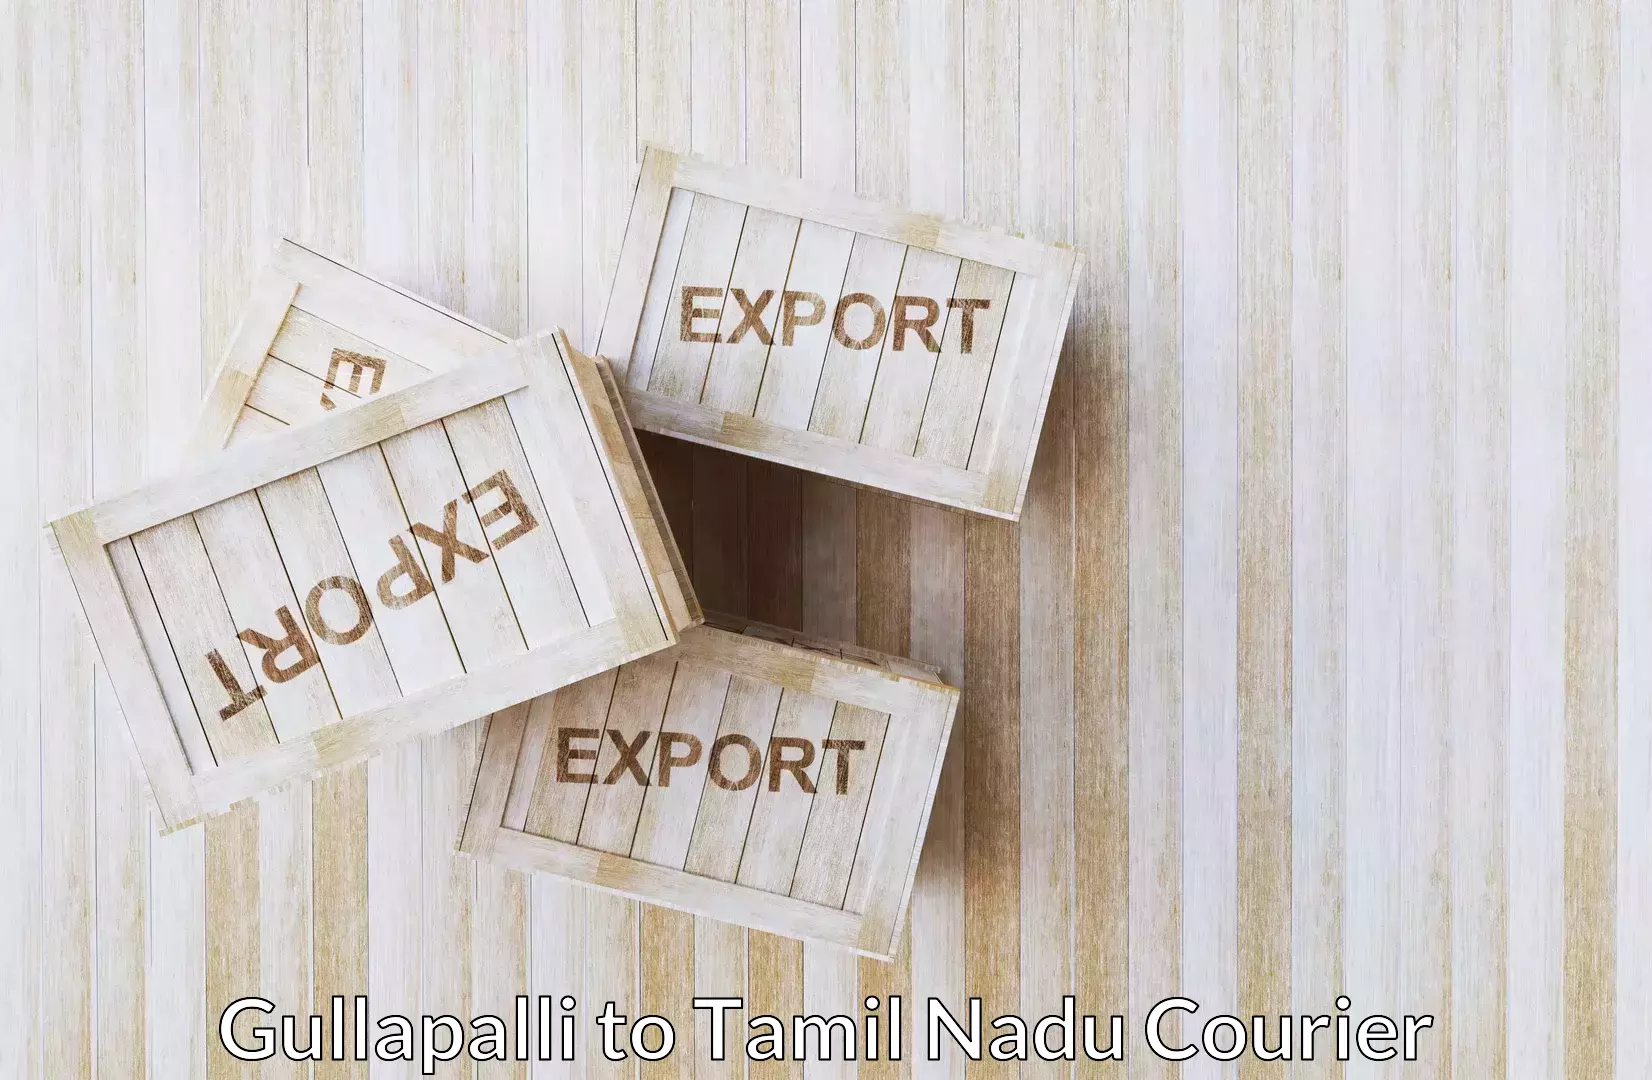 Reliable furniture transport Gullapalli to Ennore Port Chennai